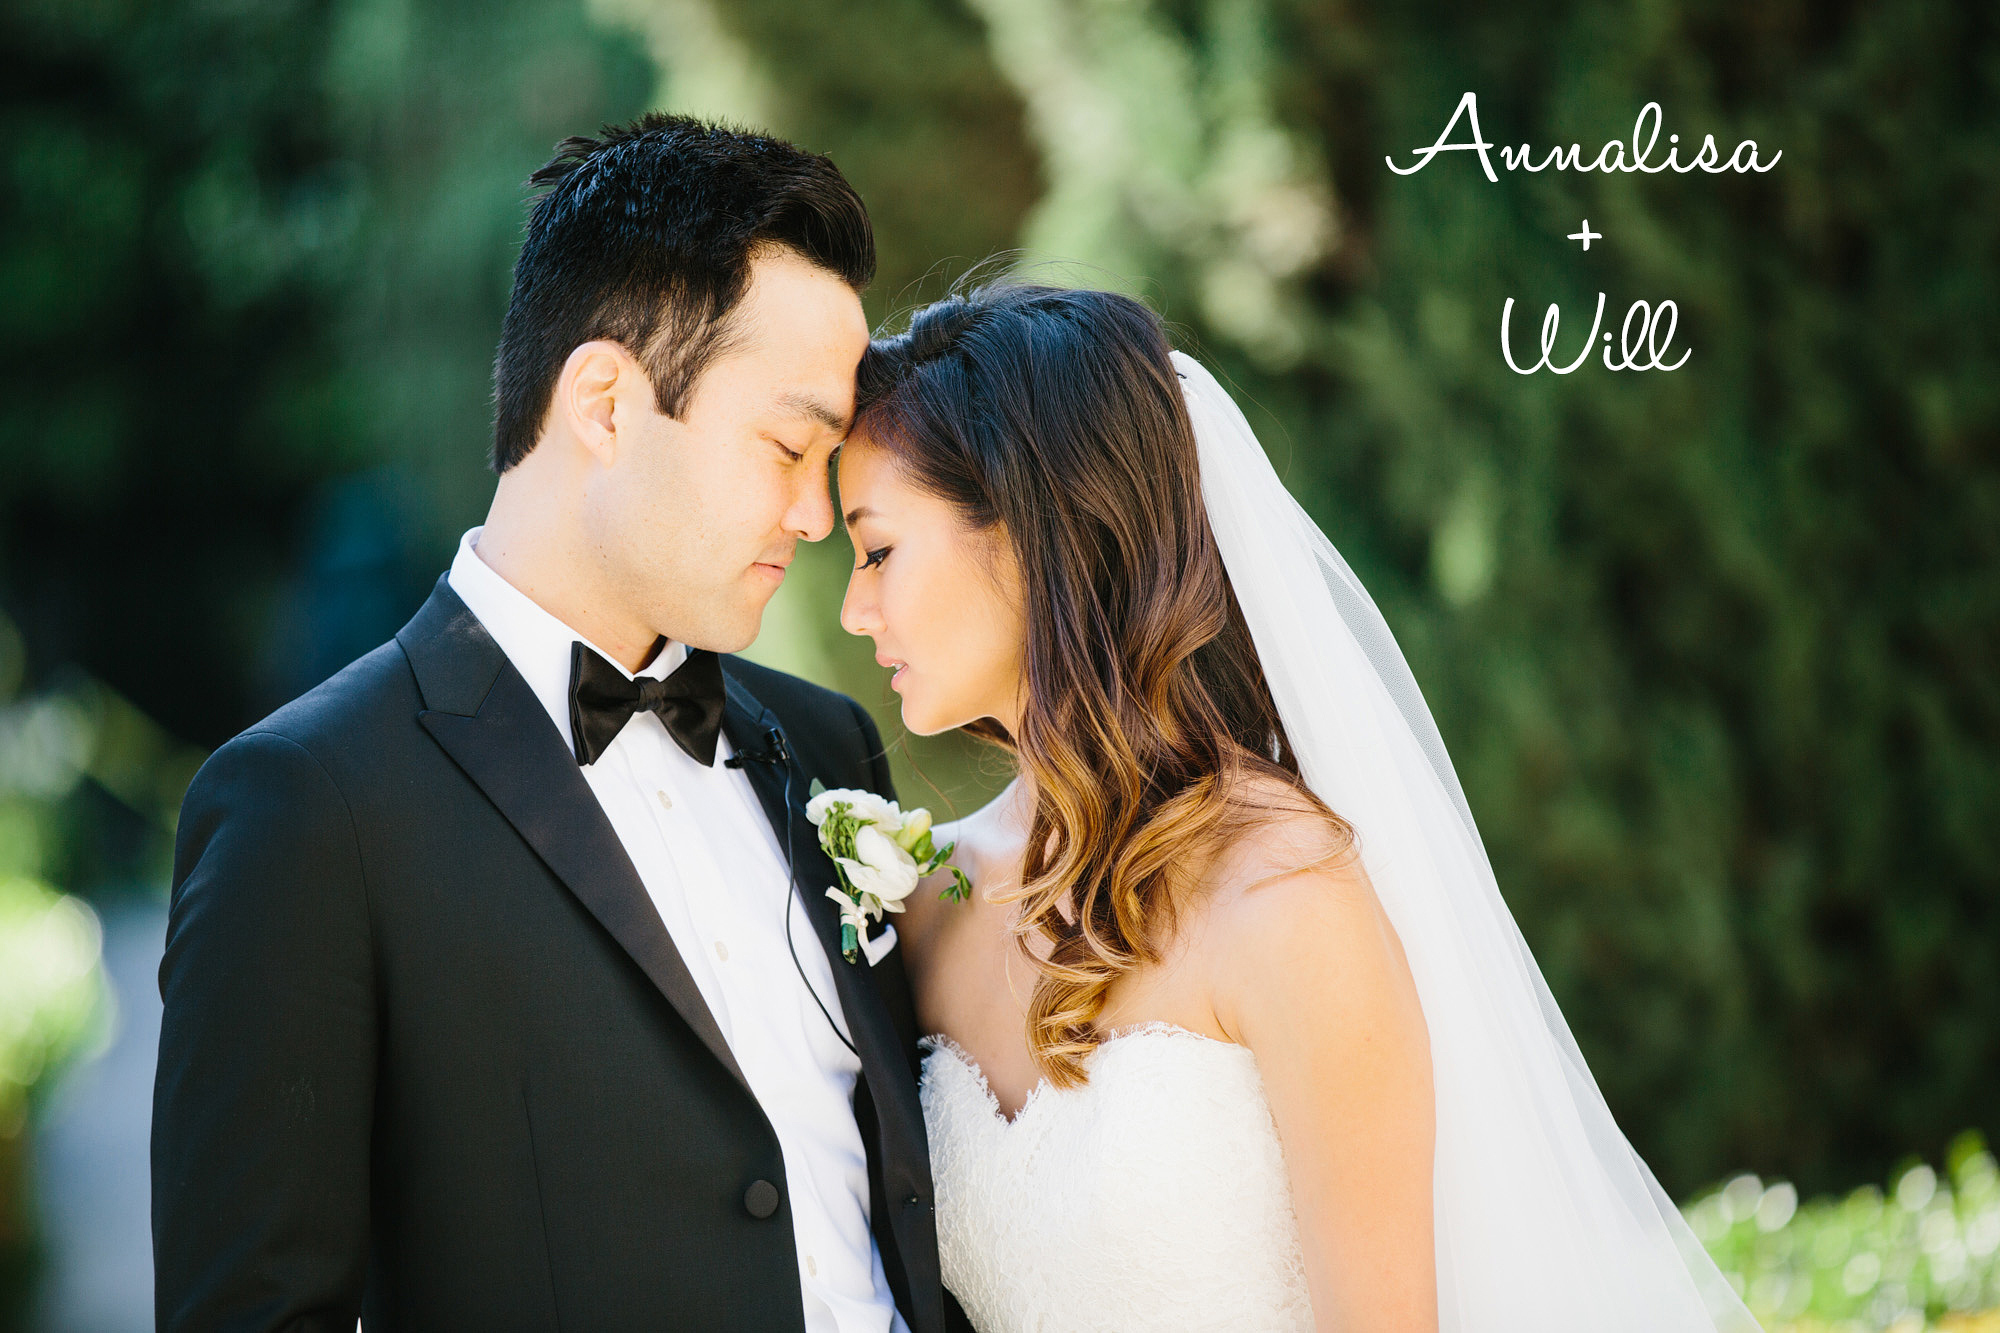 Here are photos from Annalisa + Will's wedding.